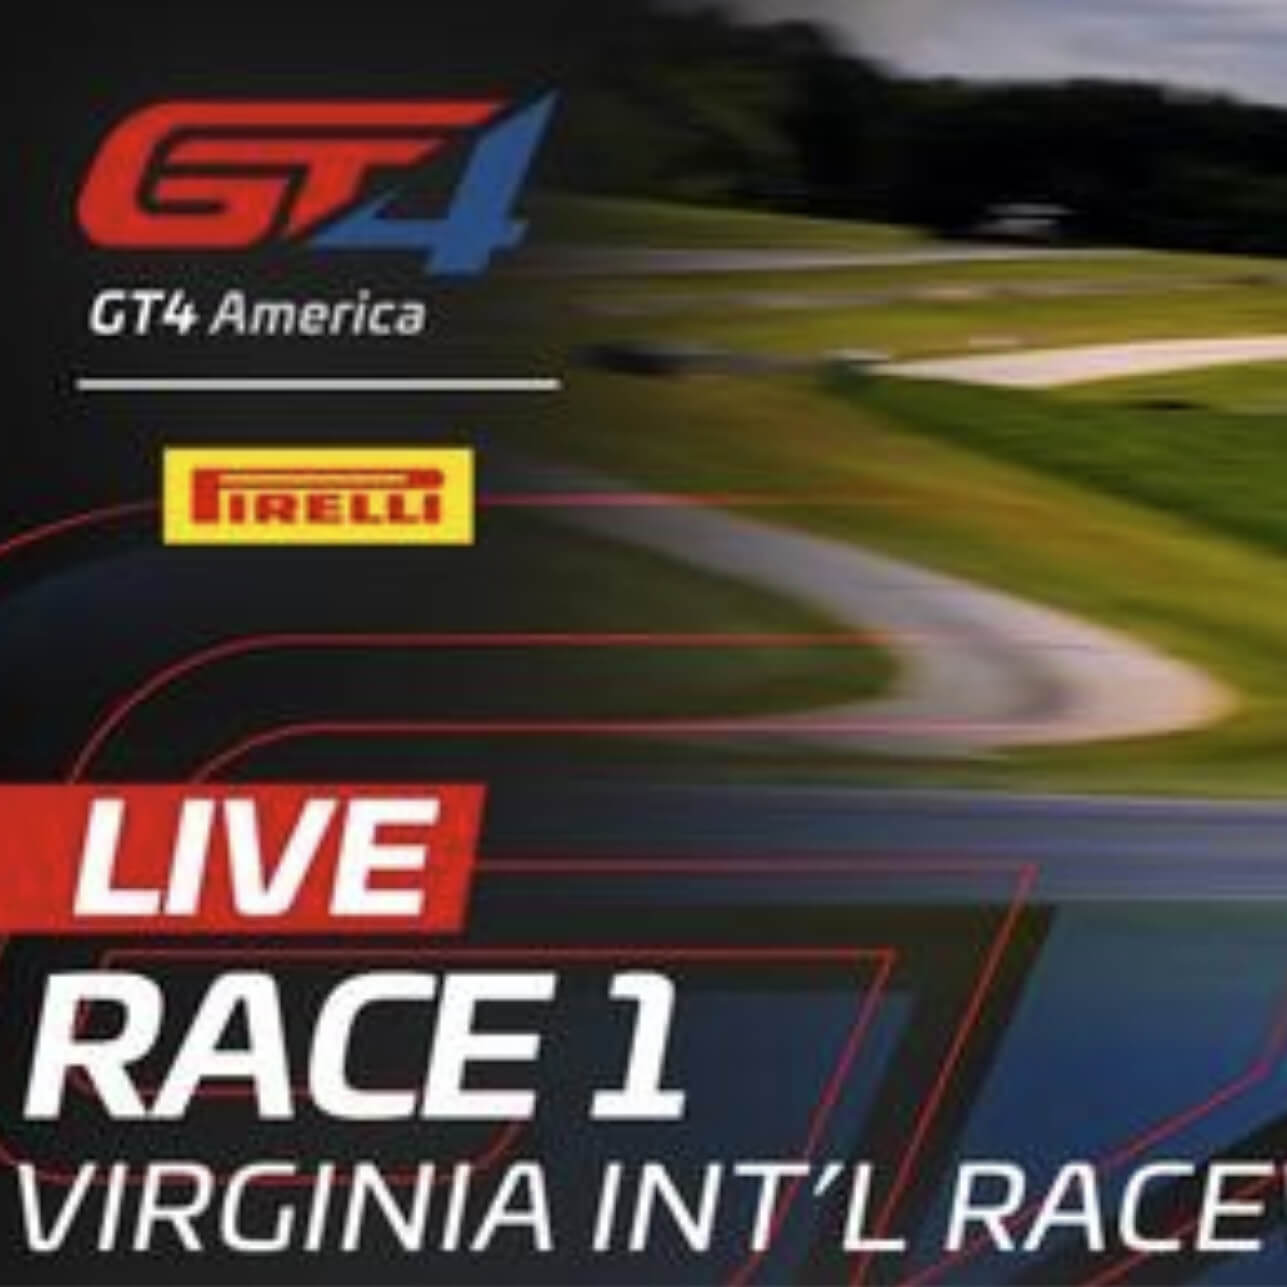 Thumbnail showing the GT4 America Logo and the Words Live, Race 1, Virginia Int'l Race